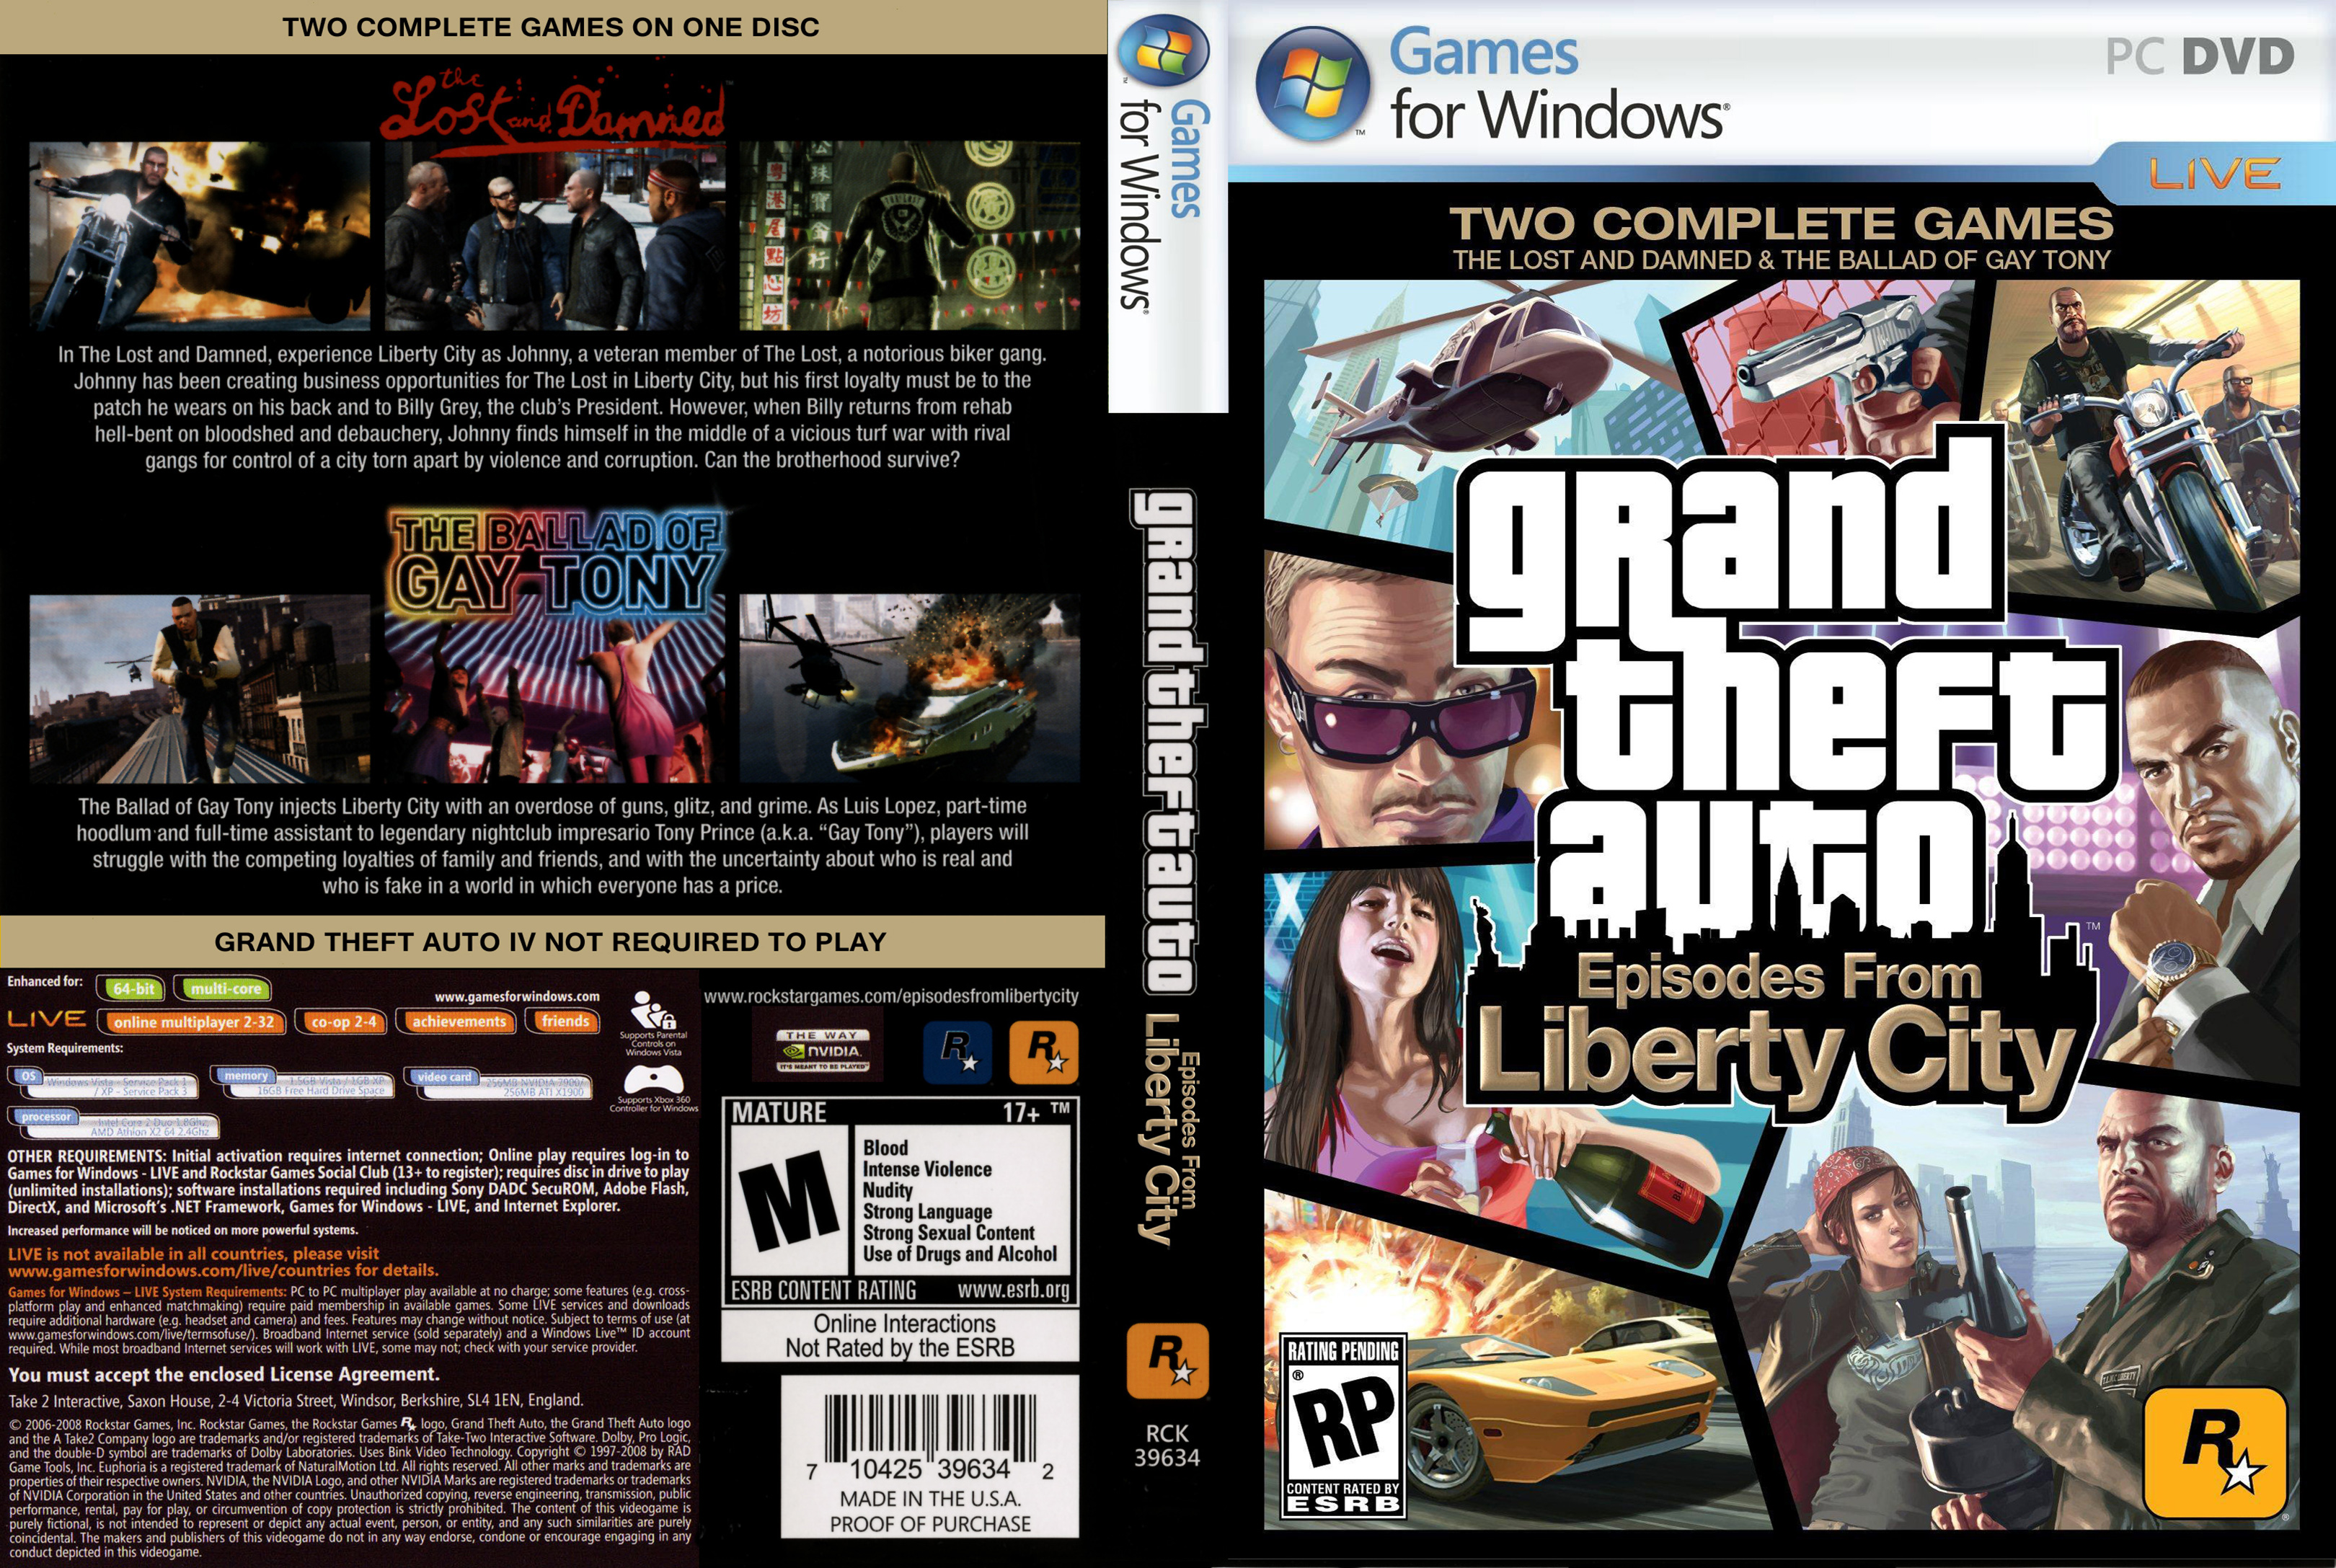 Grand Theft Auto IV: Episodes From Liberty City - DVD obal 2